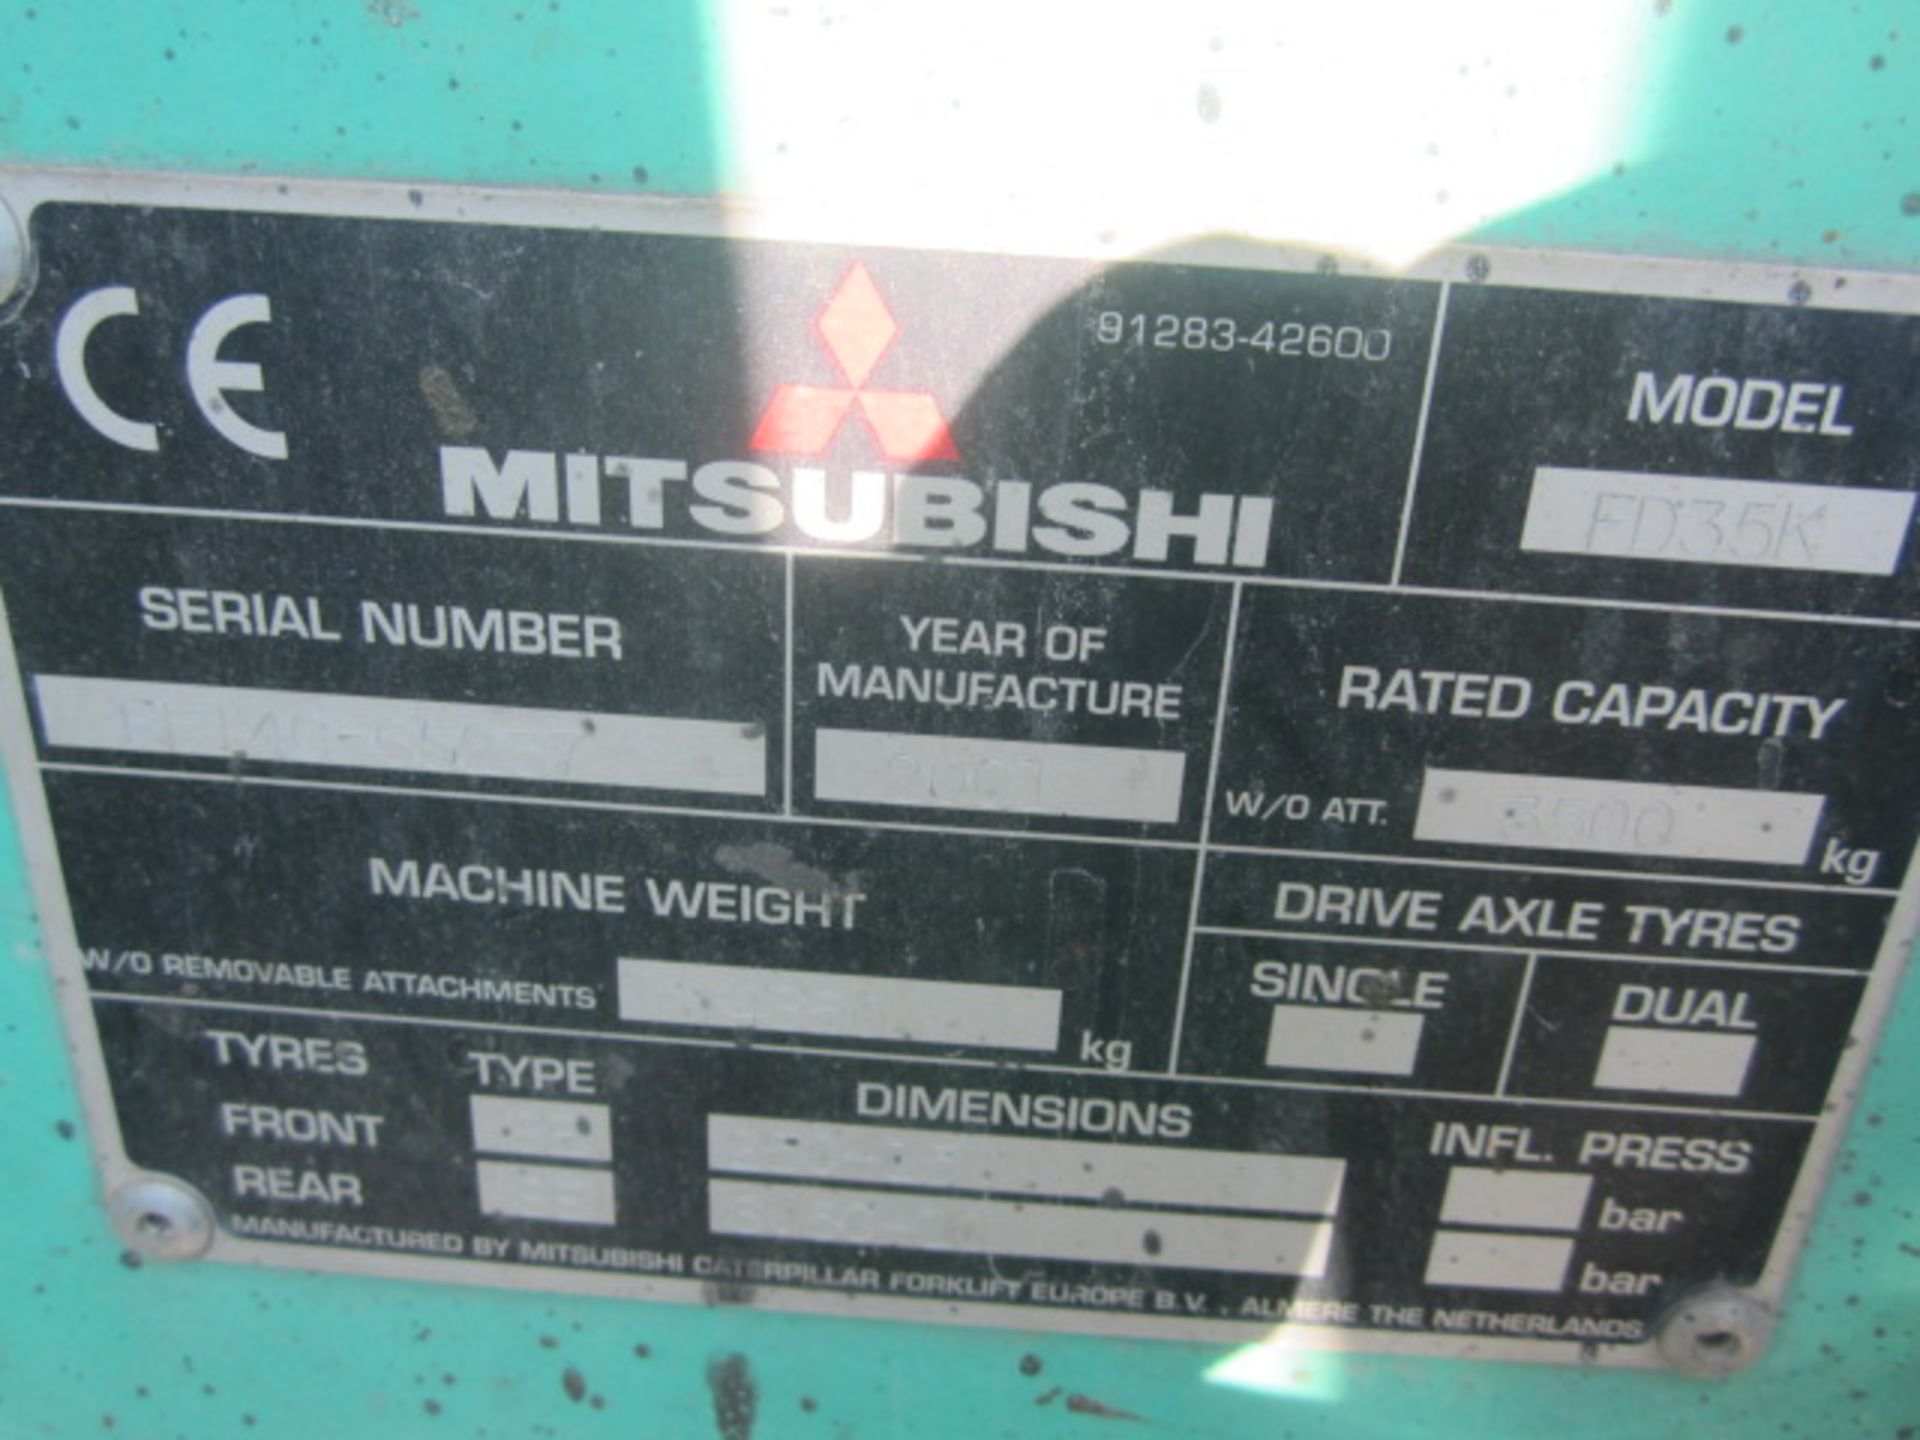 Mitsubishi 35 diesel powered duplex mast forklift truck, with side shift and all weather canopy, - Image 11 of 12